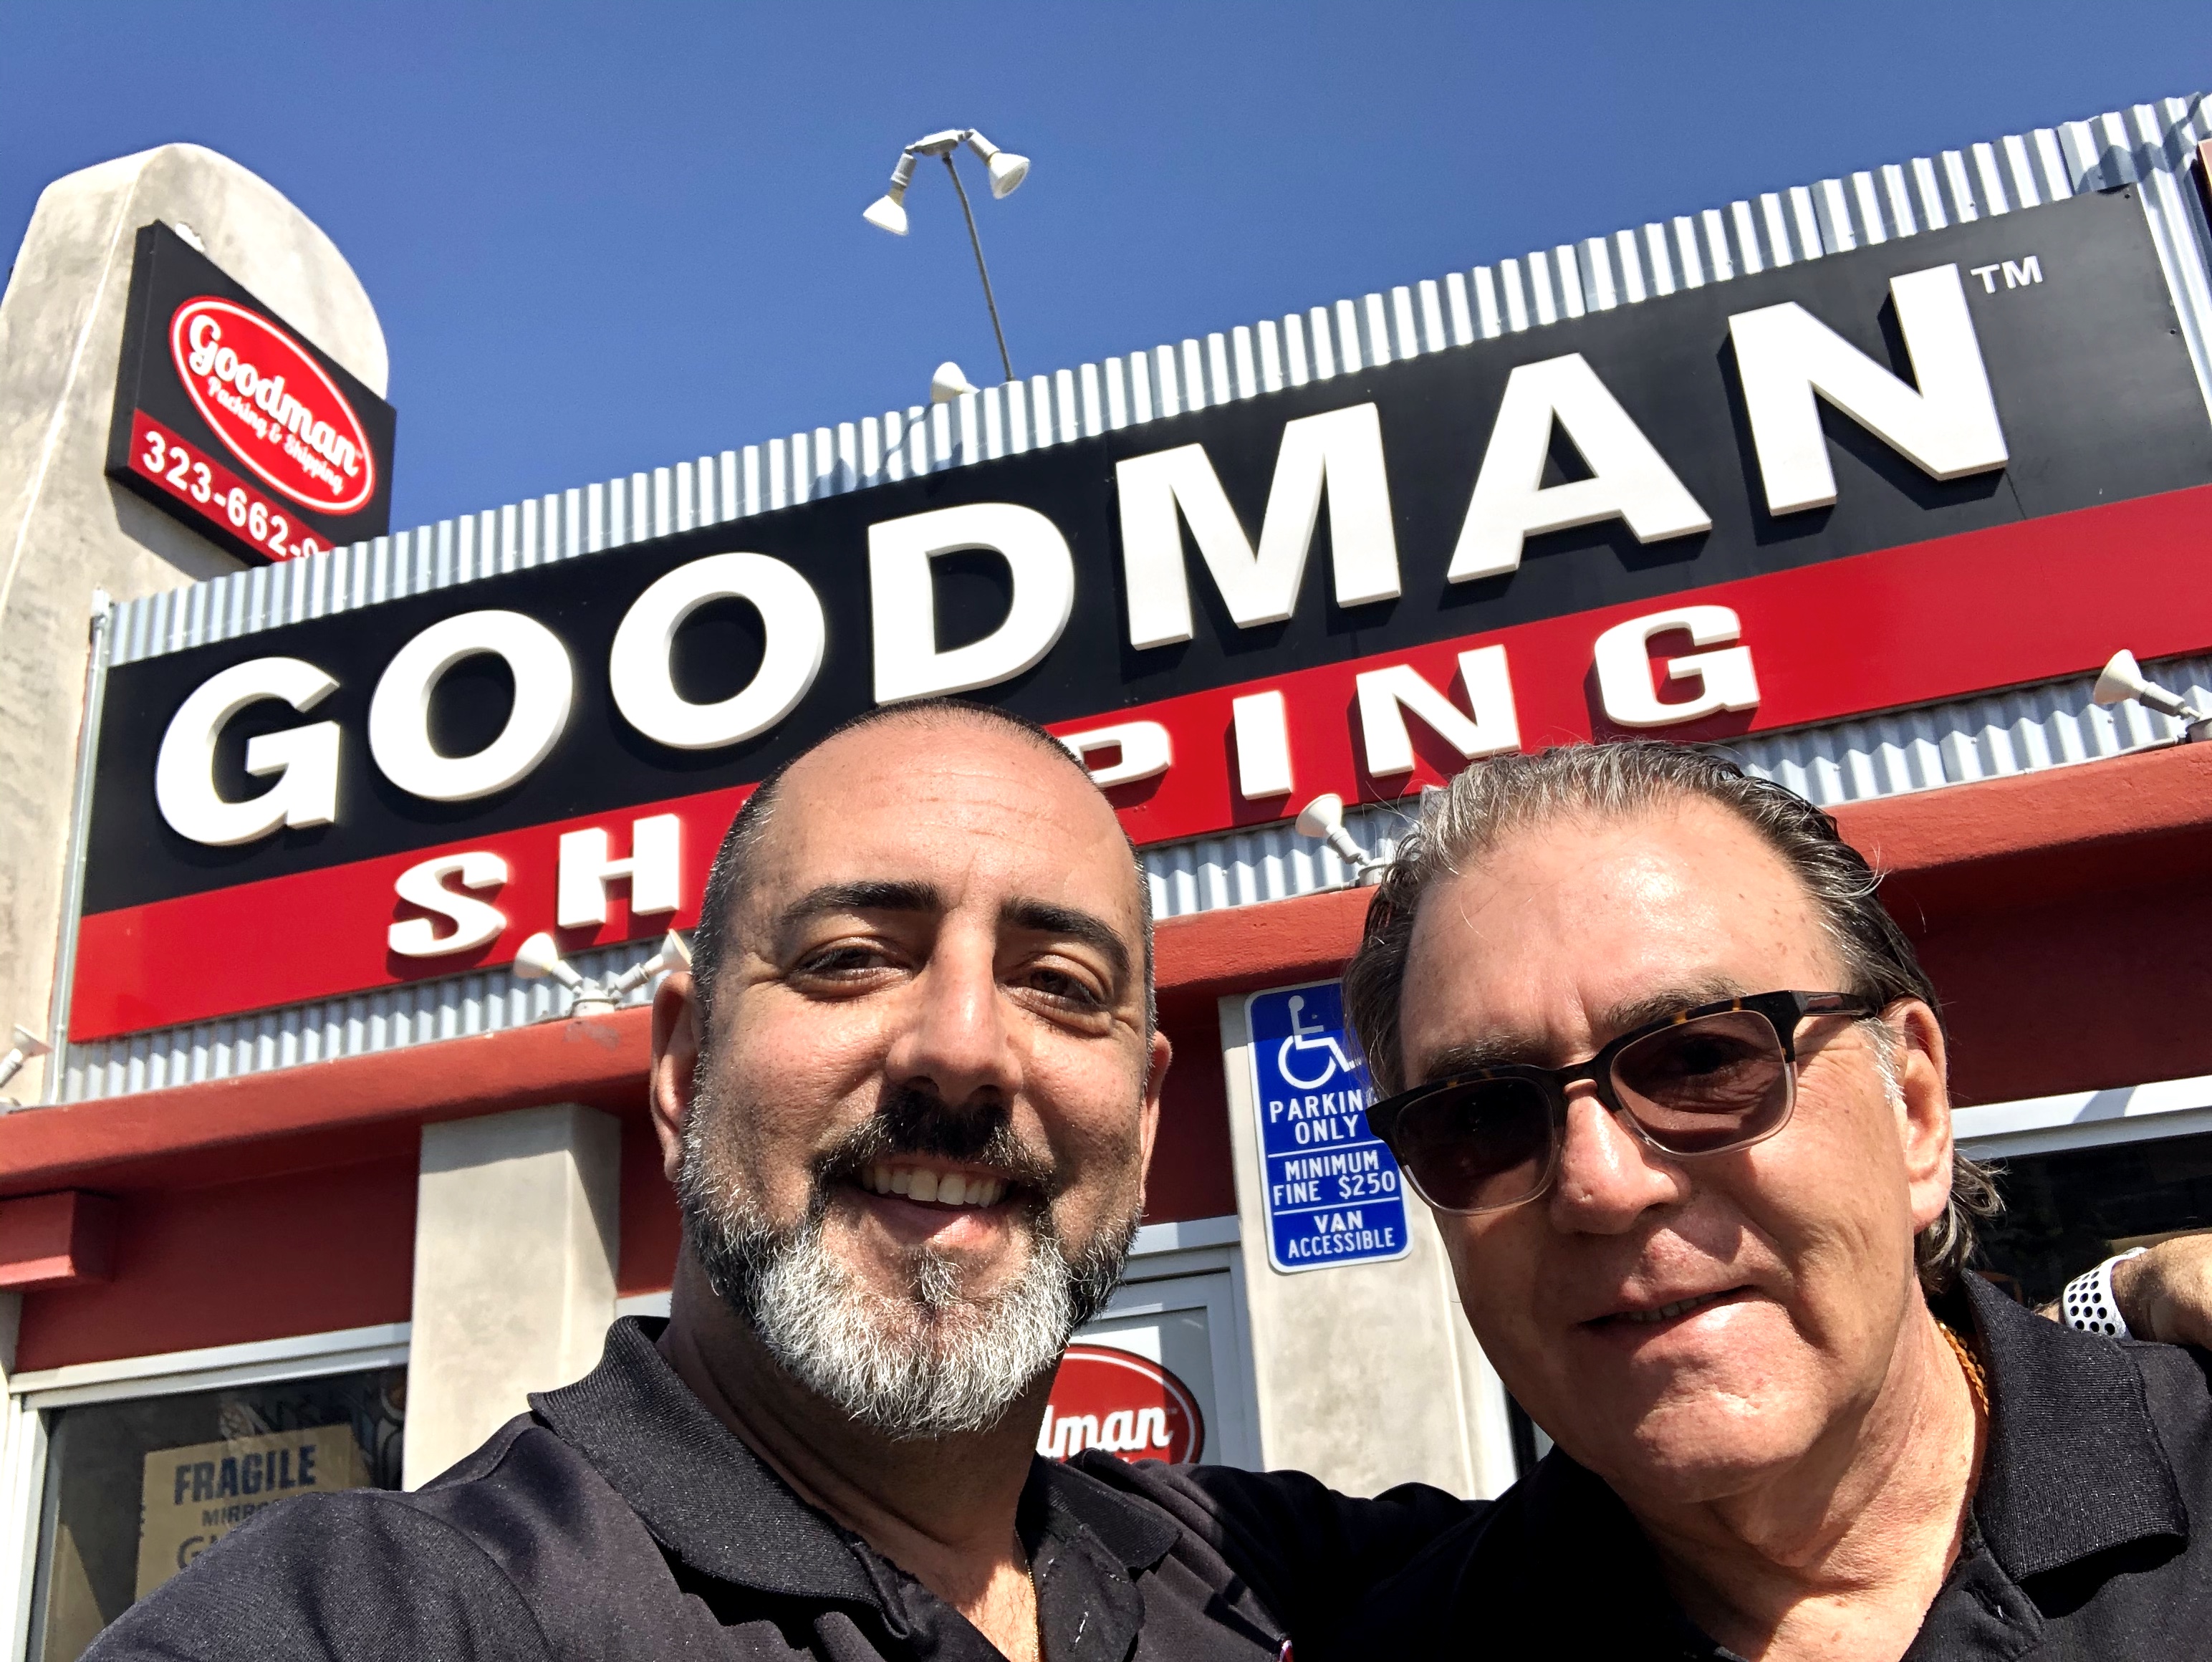 David and Coby Goodman owners of Goodman Packing & Shipping